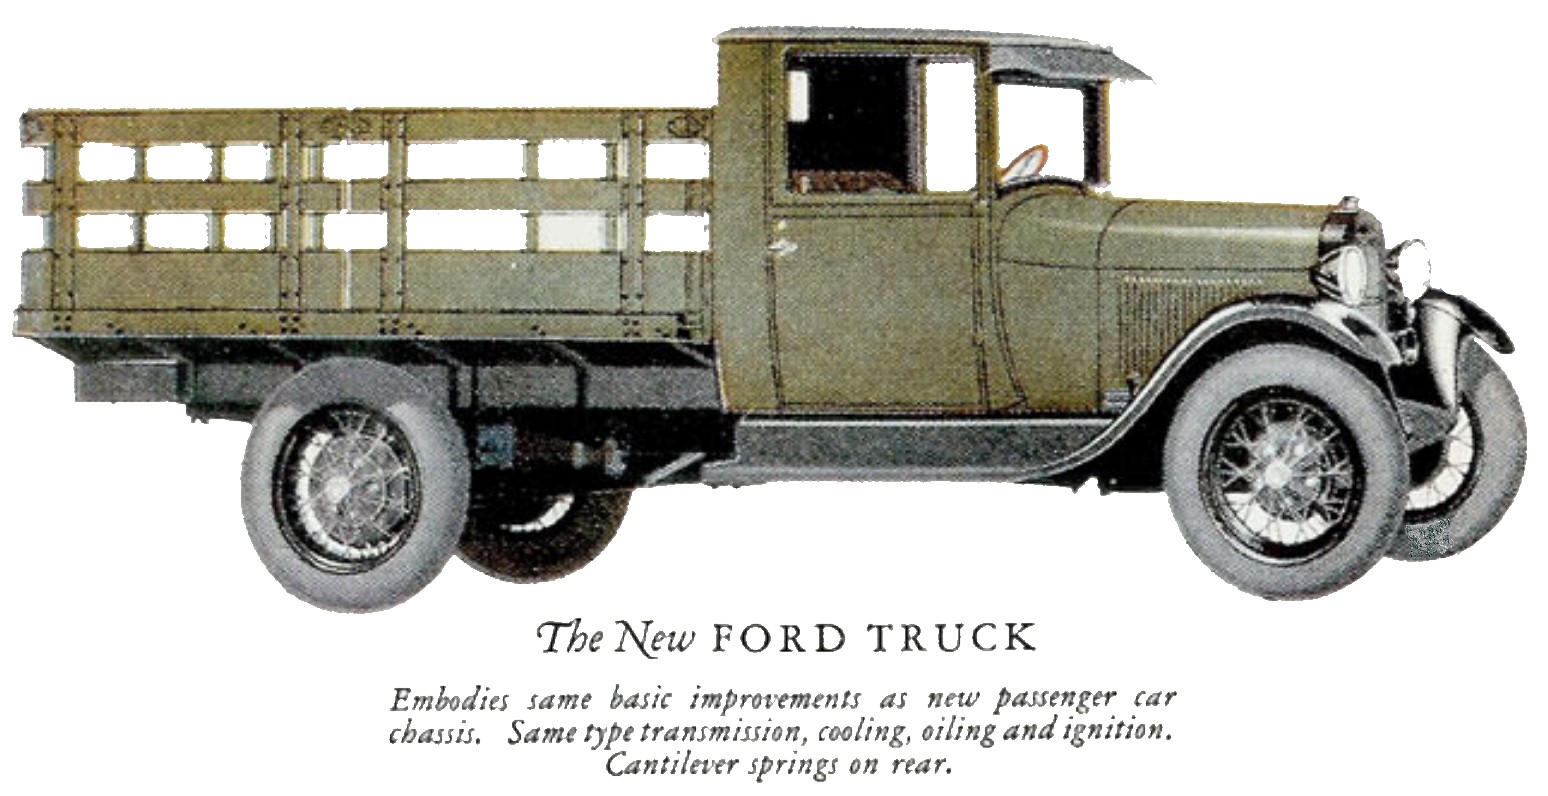 Sketch of a 1928 ford truck from the ford brochure